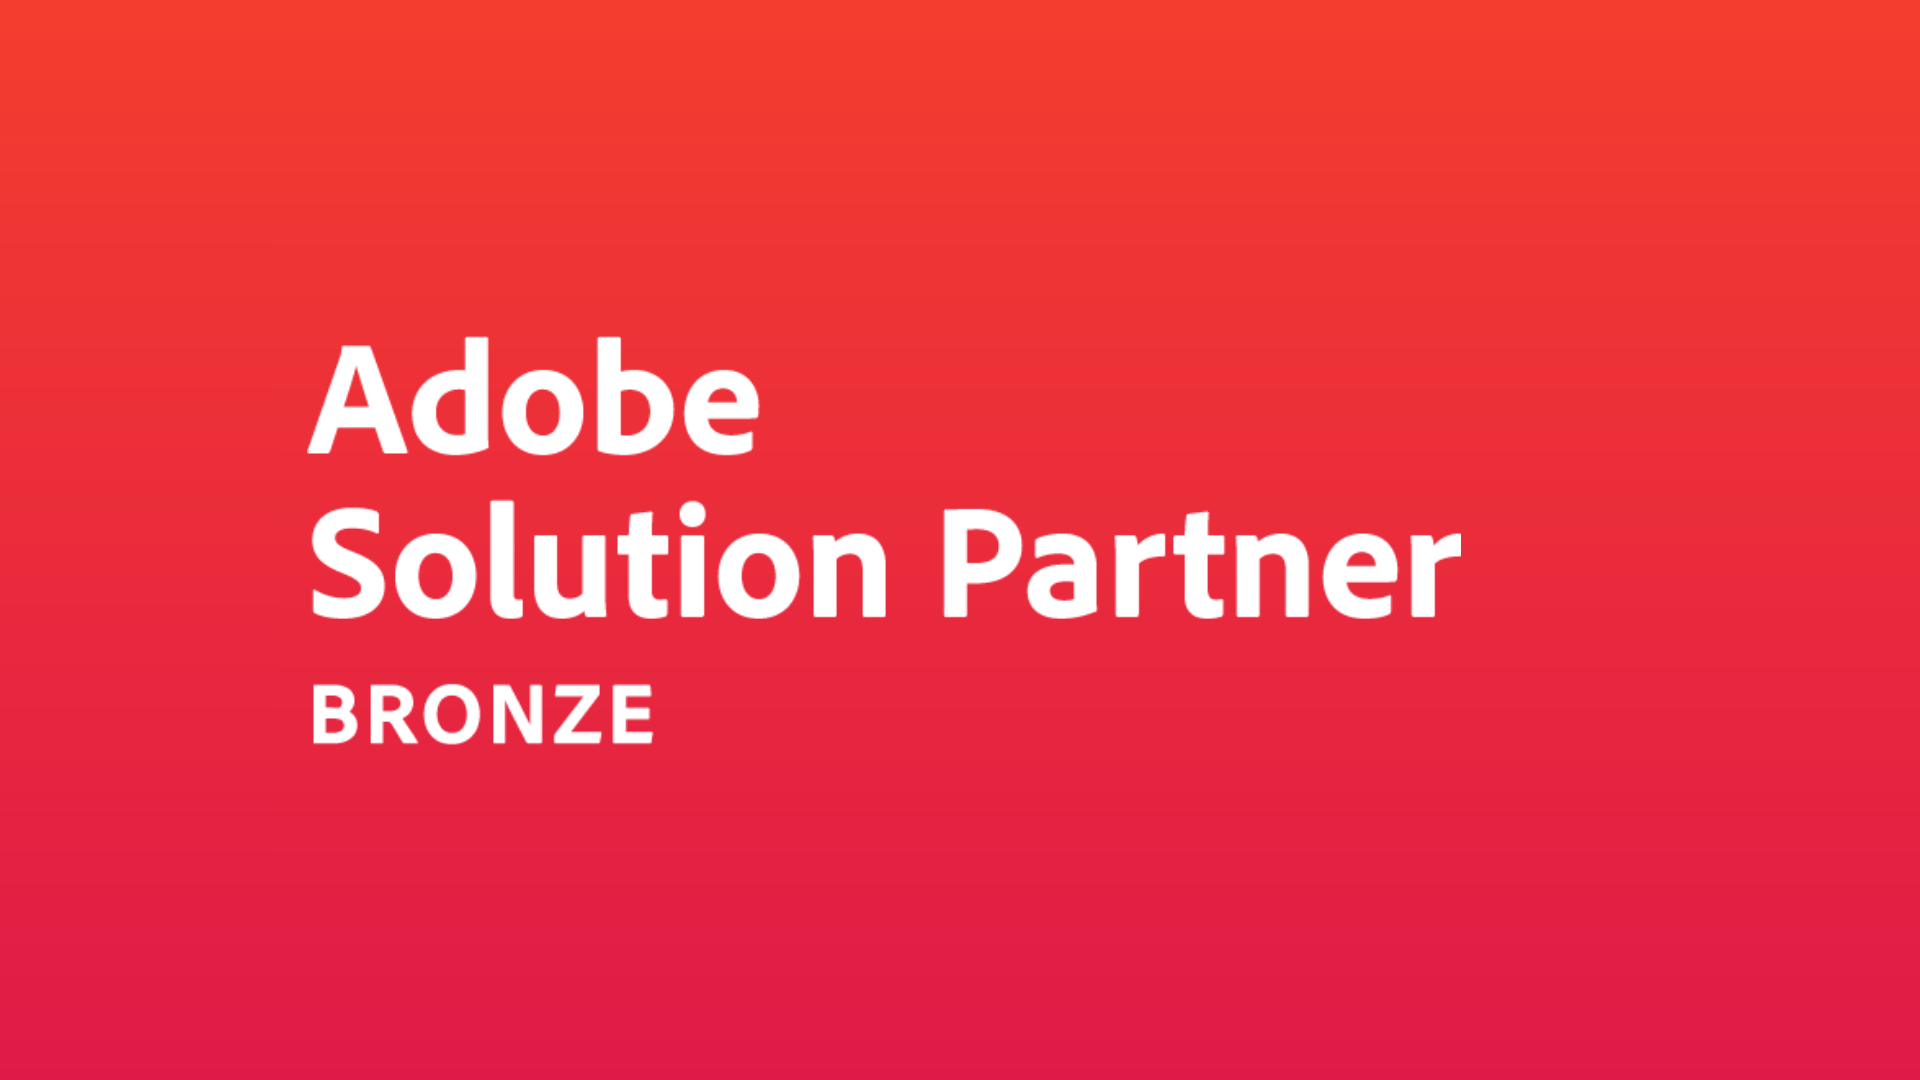 PSS is now an Adobe Bronze Solution Partner